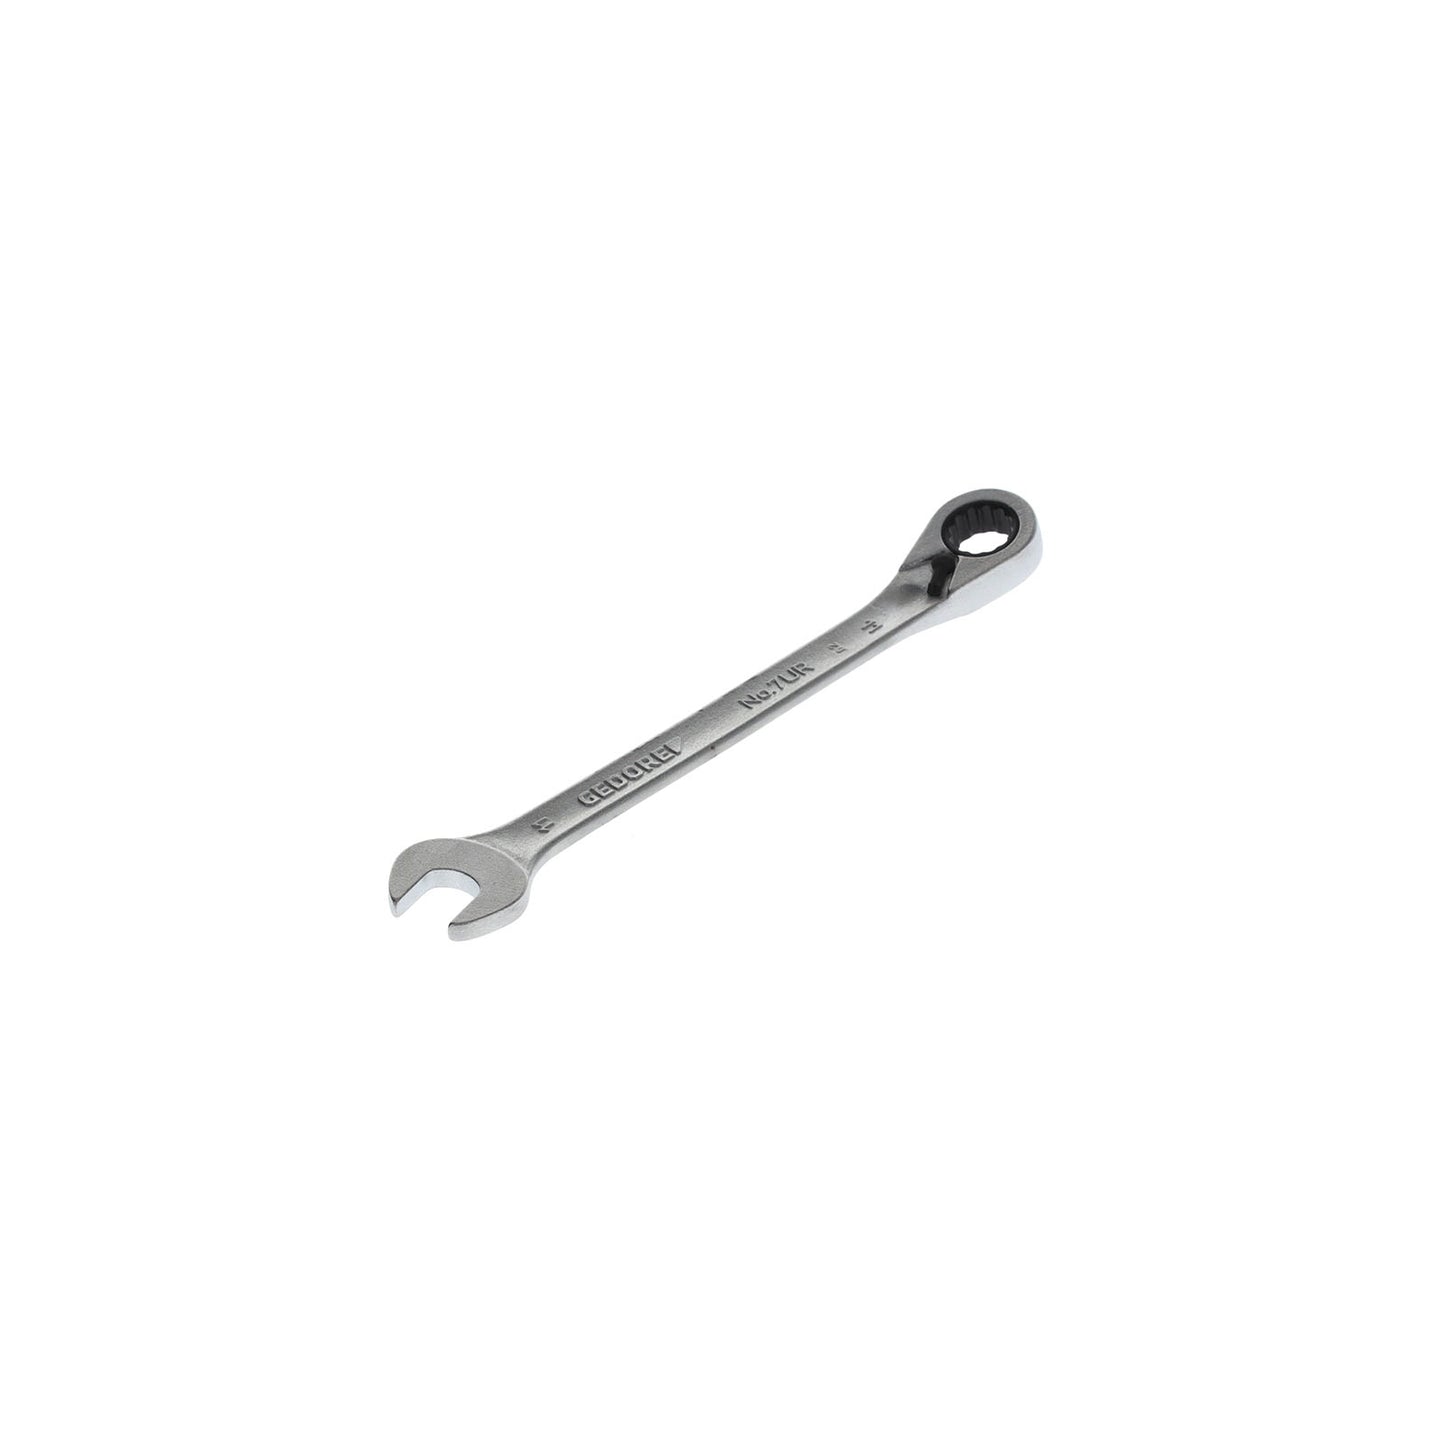 GEDORE 7 UR 11 - Ratchet combination wrench, 11mm (2297280)